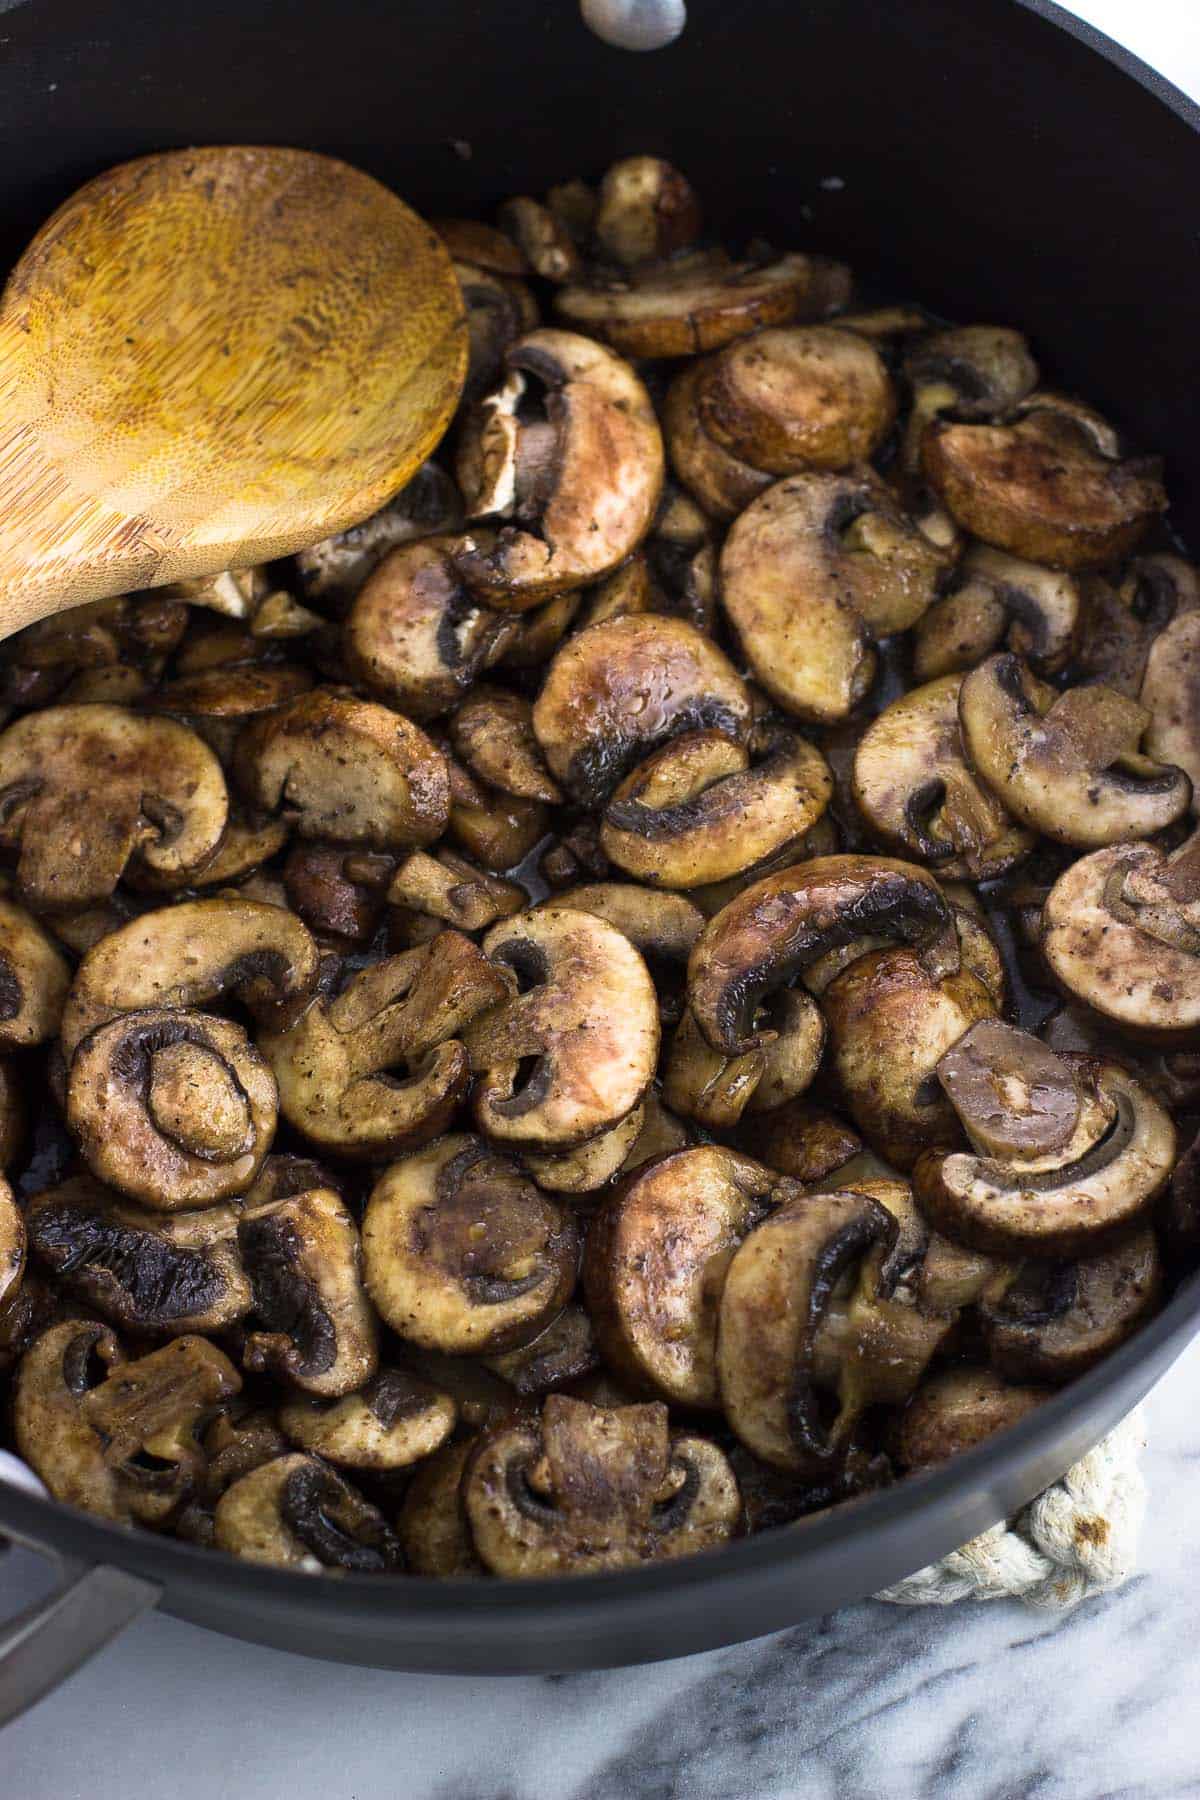 Mushrooms beginning the saute process in a pan with a wooden spoon.